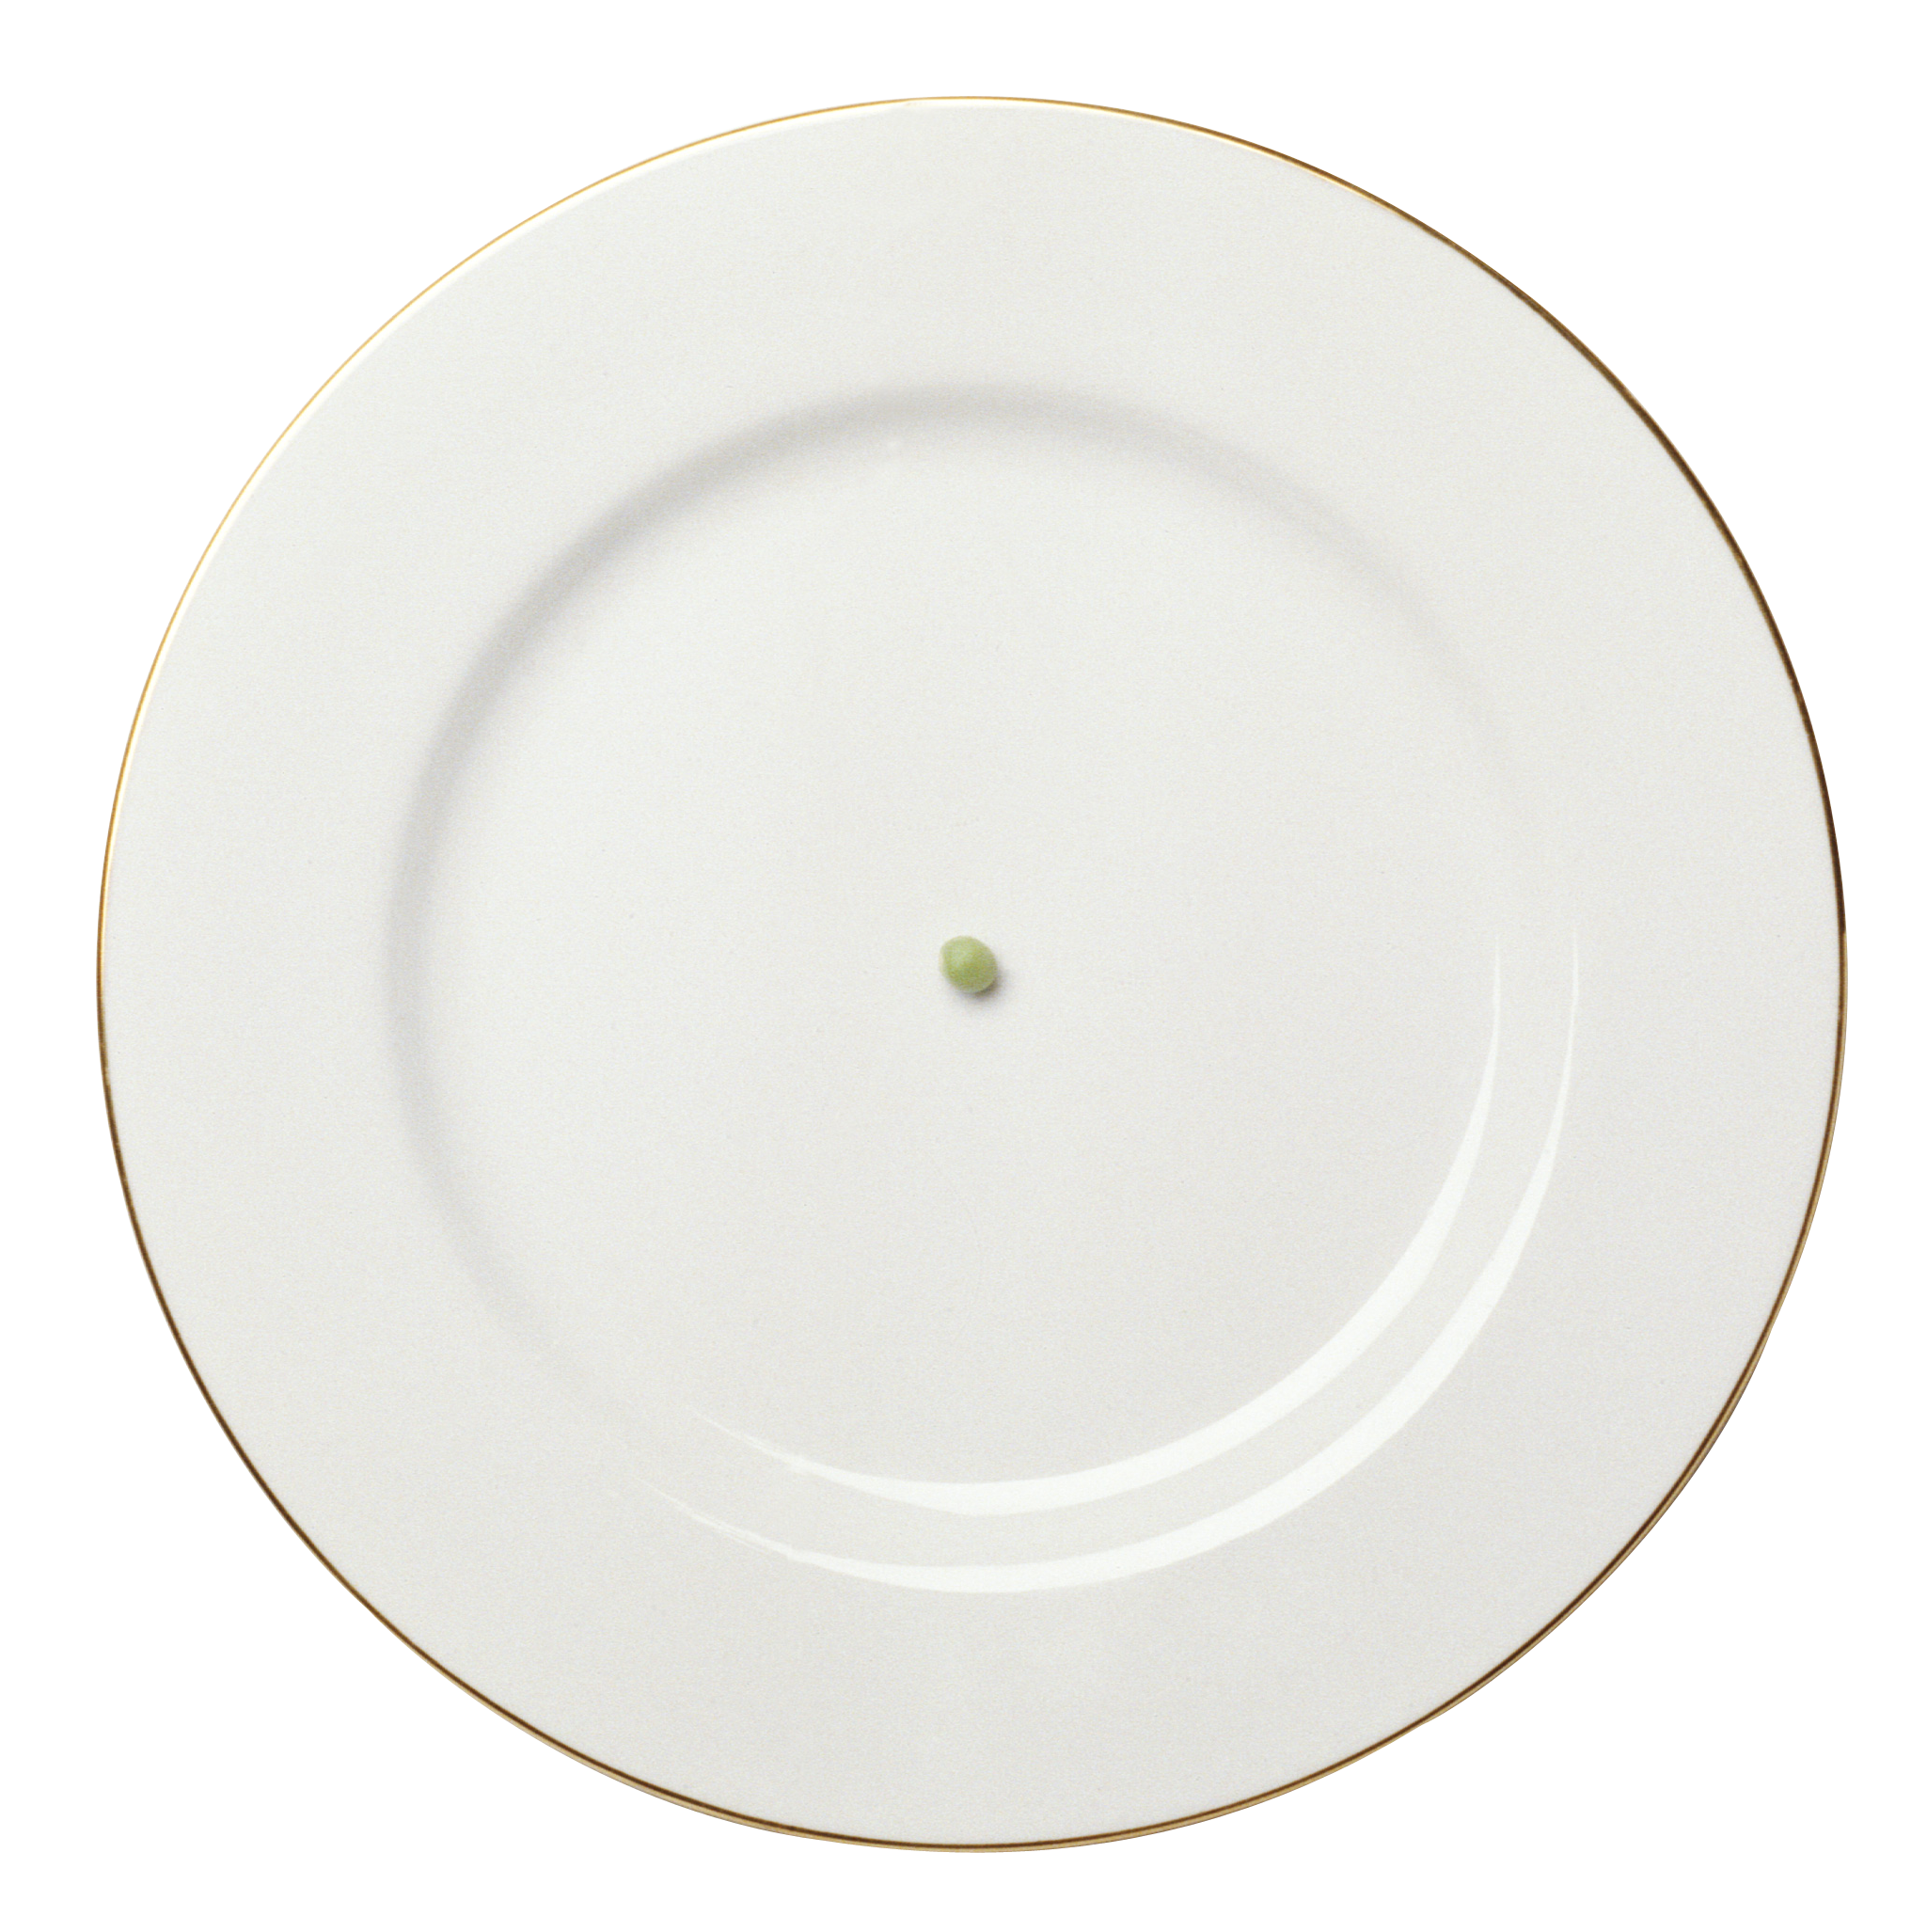 Plate PNG